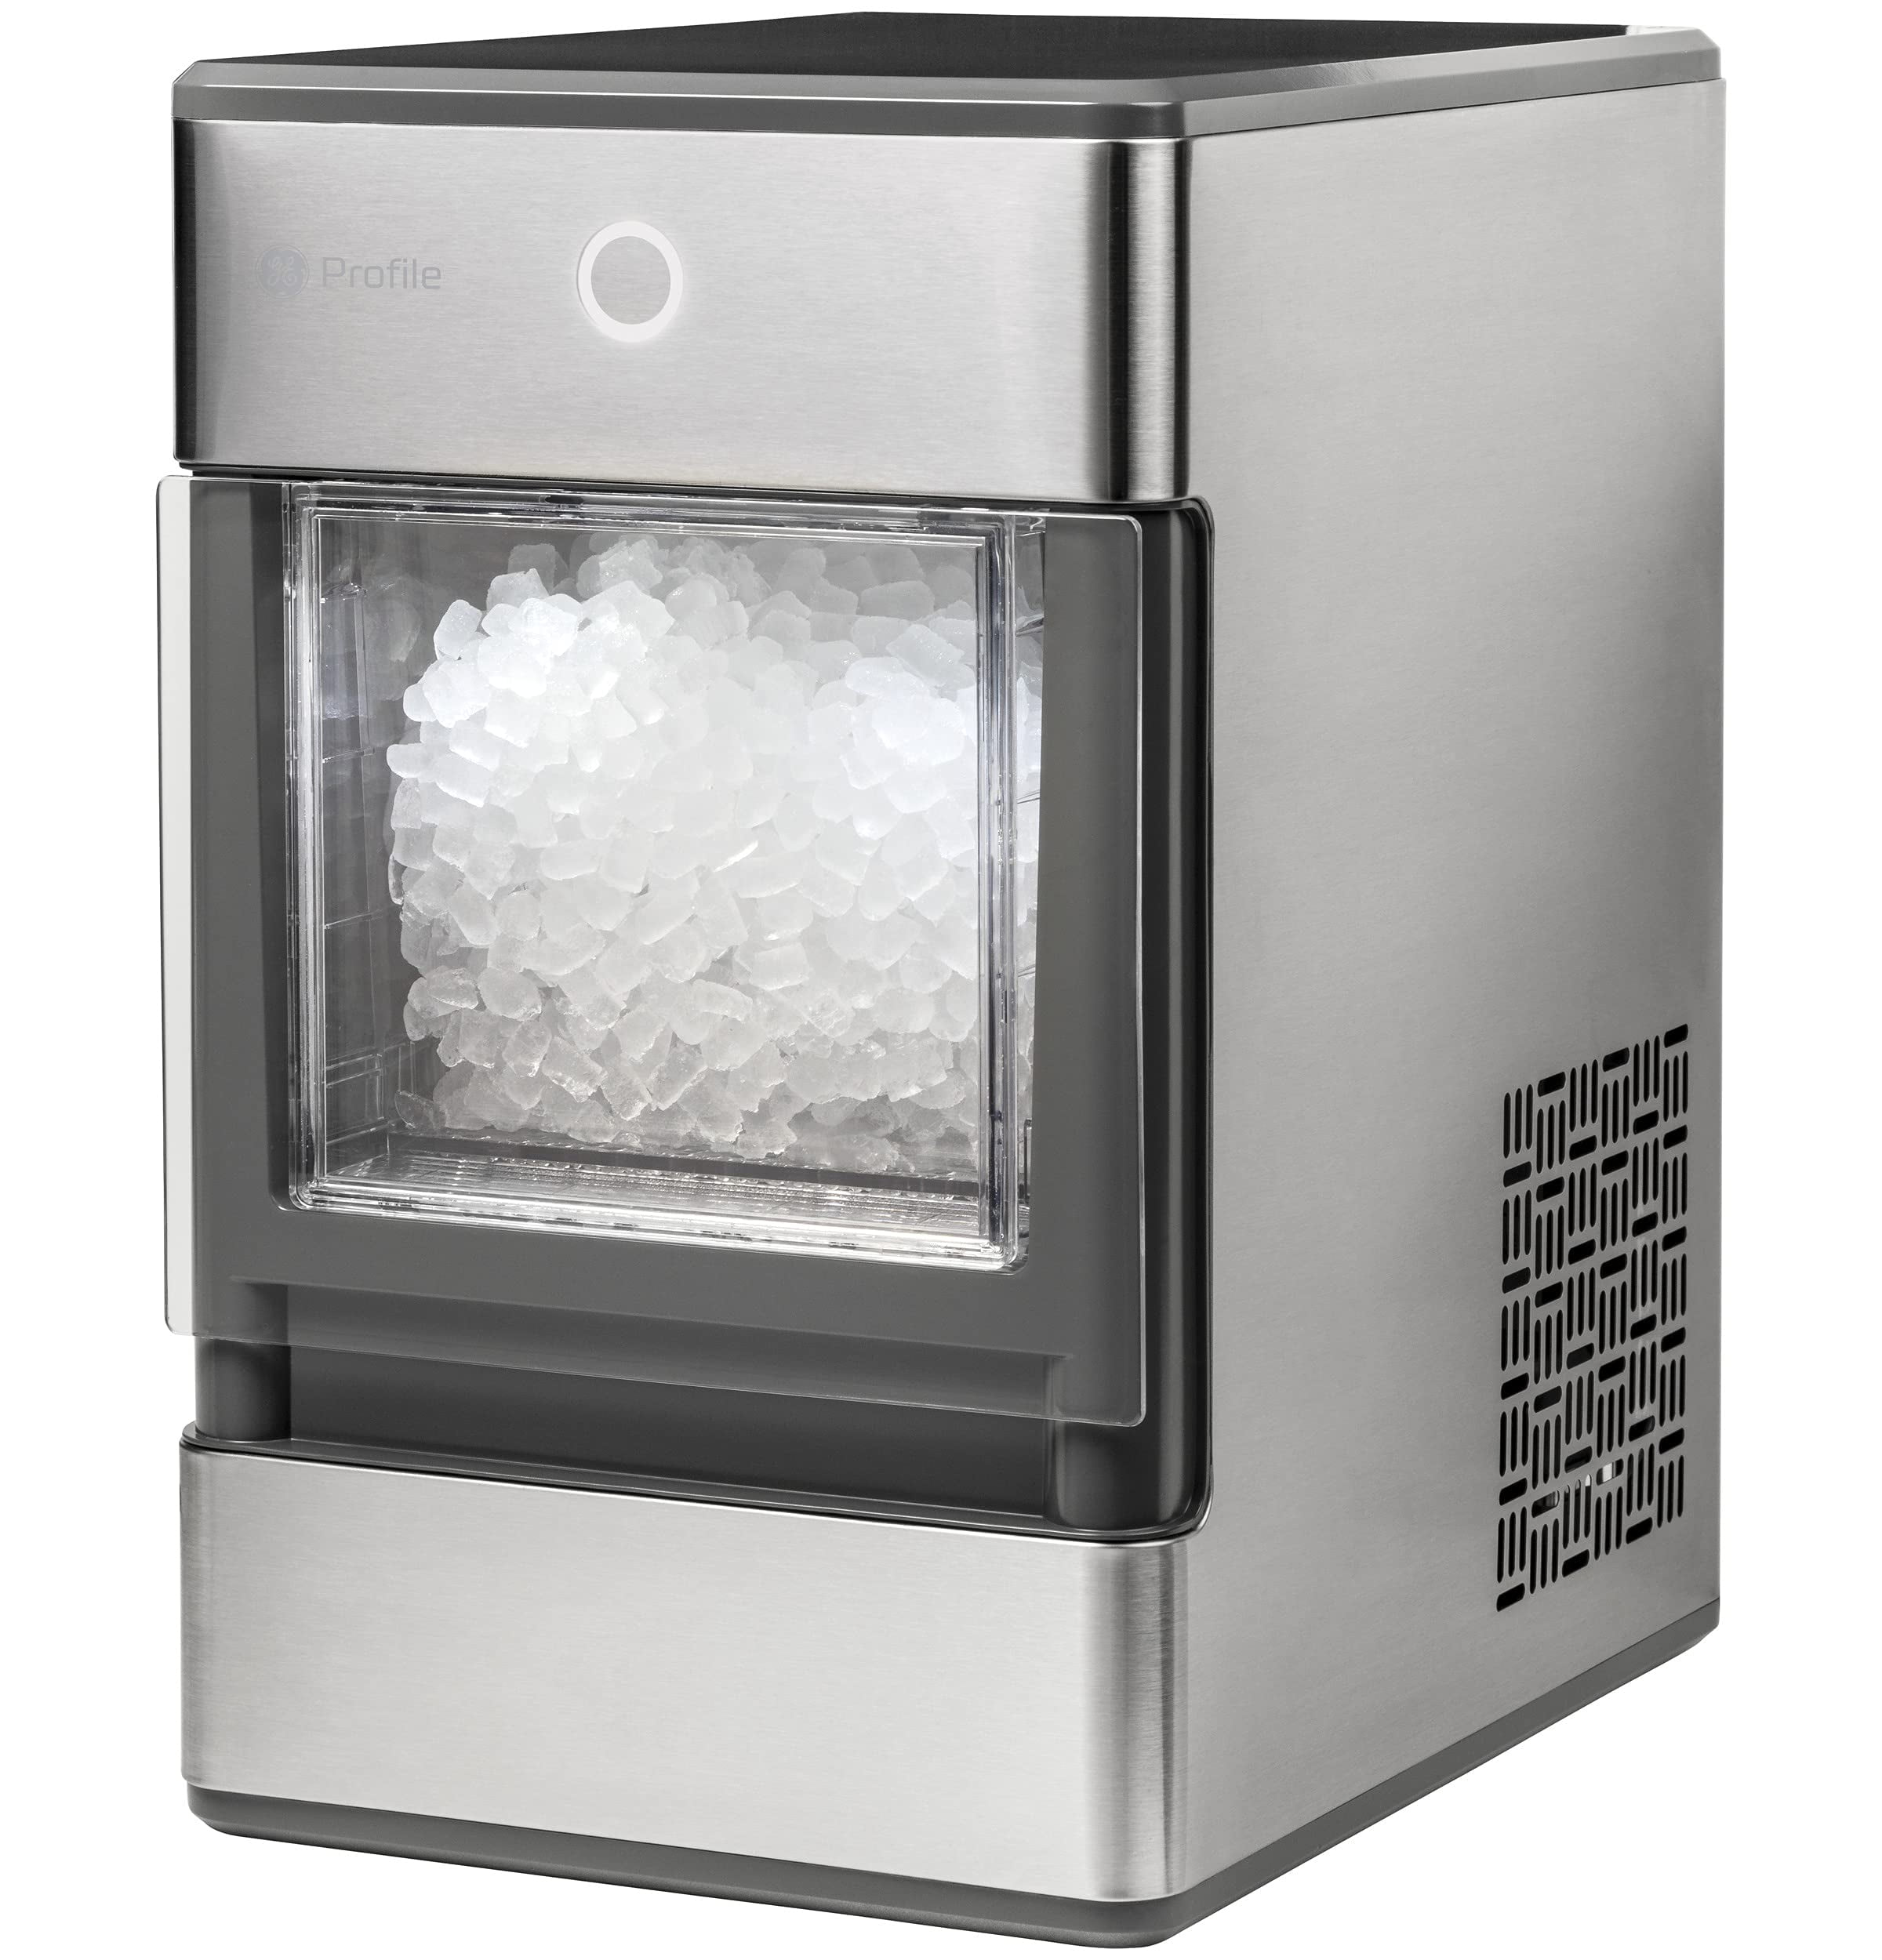 Sycees Nugget Ice Maker Countertop, 55lbs/24h, 13lbs Storage, Sonic Ice Ready in 7 Mins, 2 Ways to Add Water, Self-Cleaning Pellet Ice Machine for